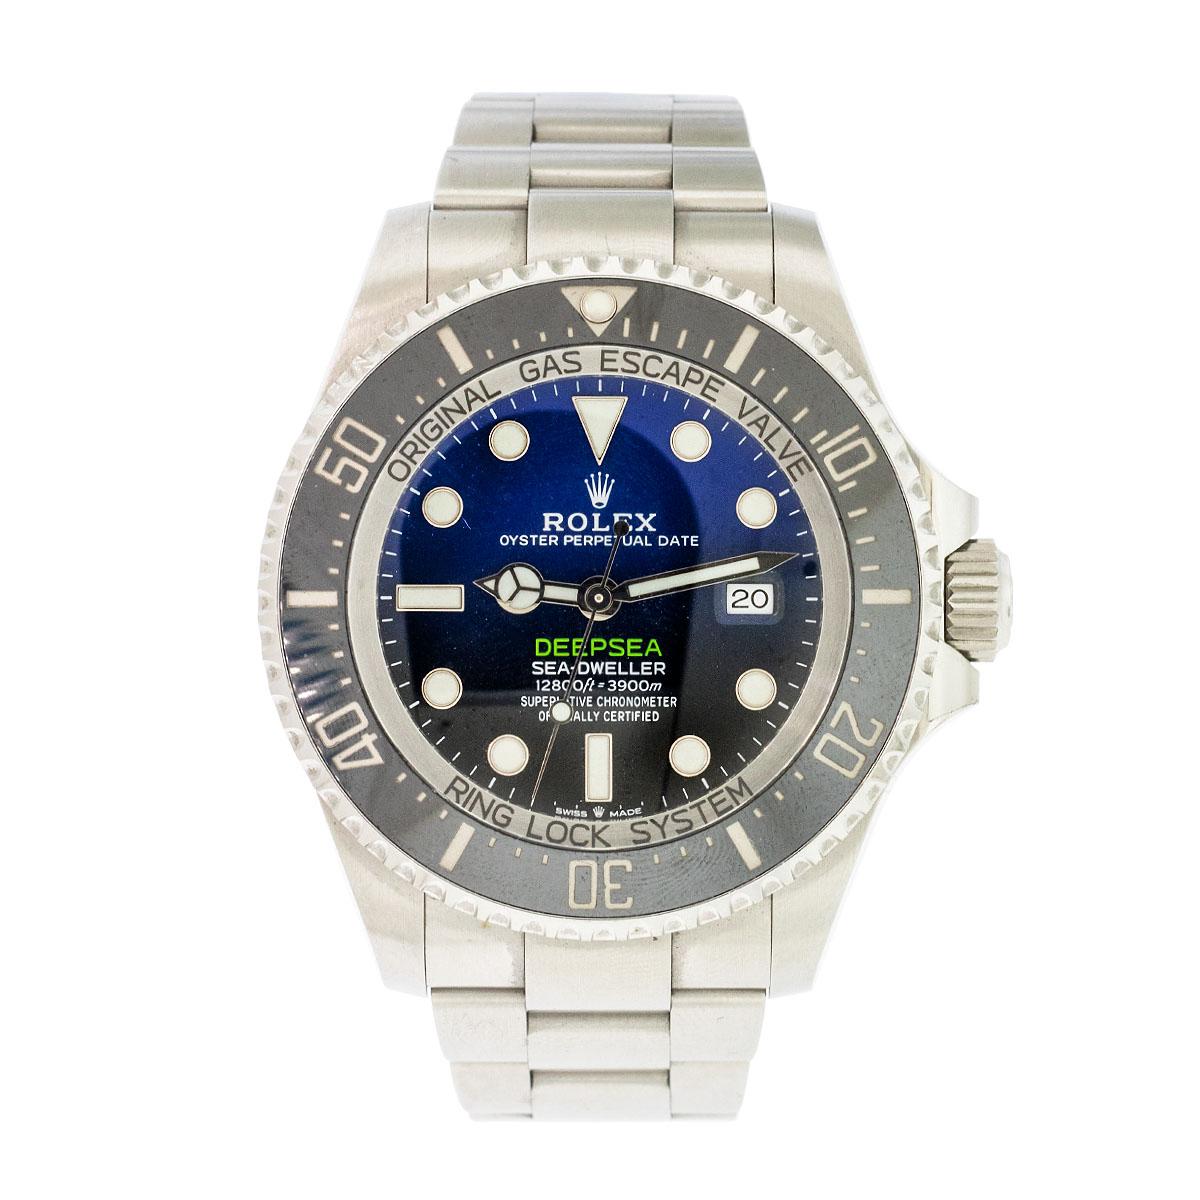 Rolex 126660 Deepsea James Cameron Stainless Steel Watch

Exploring the Abyss with the Rolex 126660 Deepsea James Cameron

In the world of luxury watches, Rolex stands as a symbol of precision, durability, and timeless elegance. The Rolex 126660